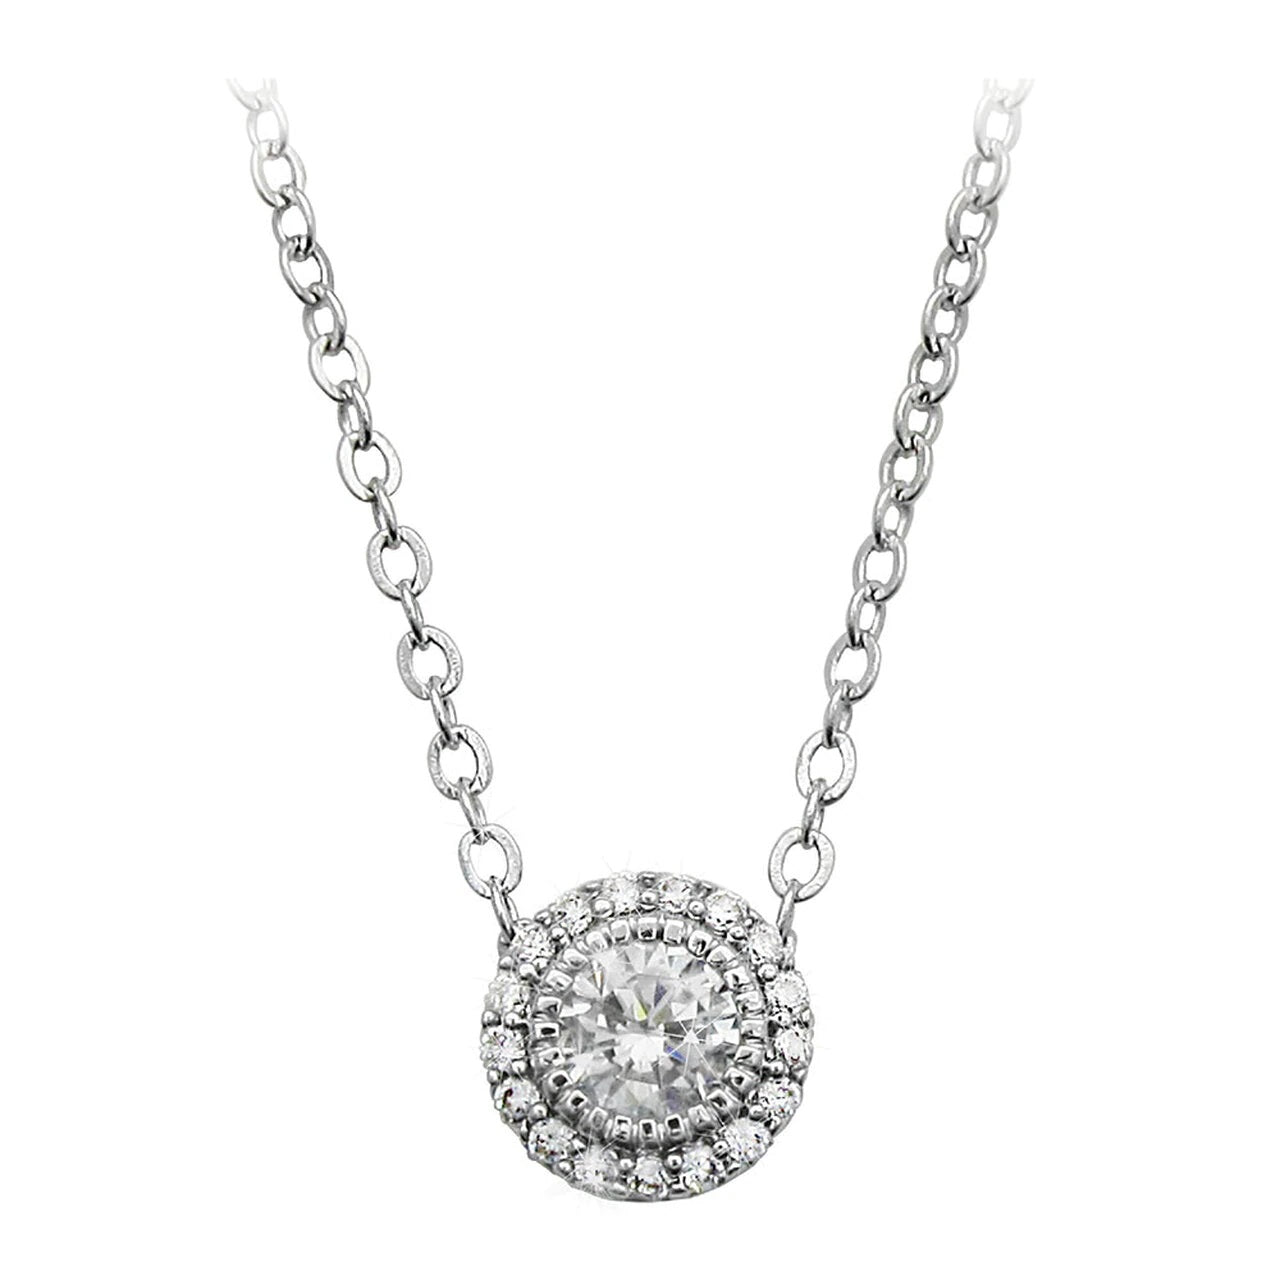 Tipperary Crystal Silver Stud Cz With Pave Surround Pendant  Classically feminine this elegant pendant is fashioned in timeless silver. The eye-catching piece features a round clear crystal center stone. Glittering clear crystals form a circular halo frame adding just the right amount of sparkle. 